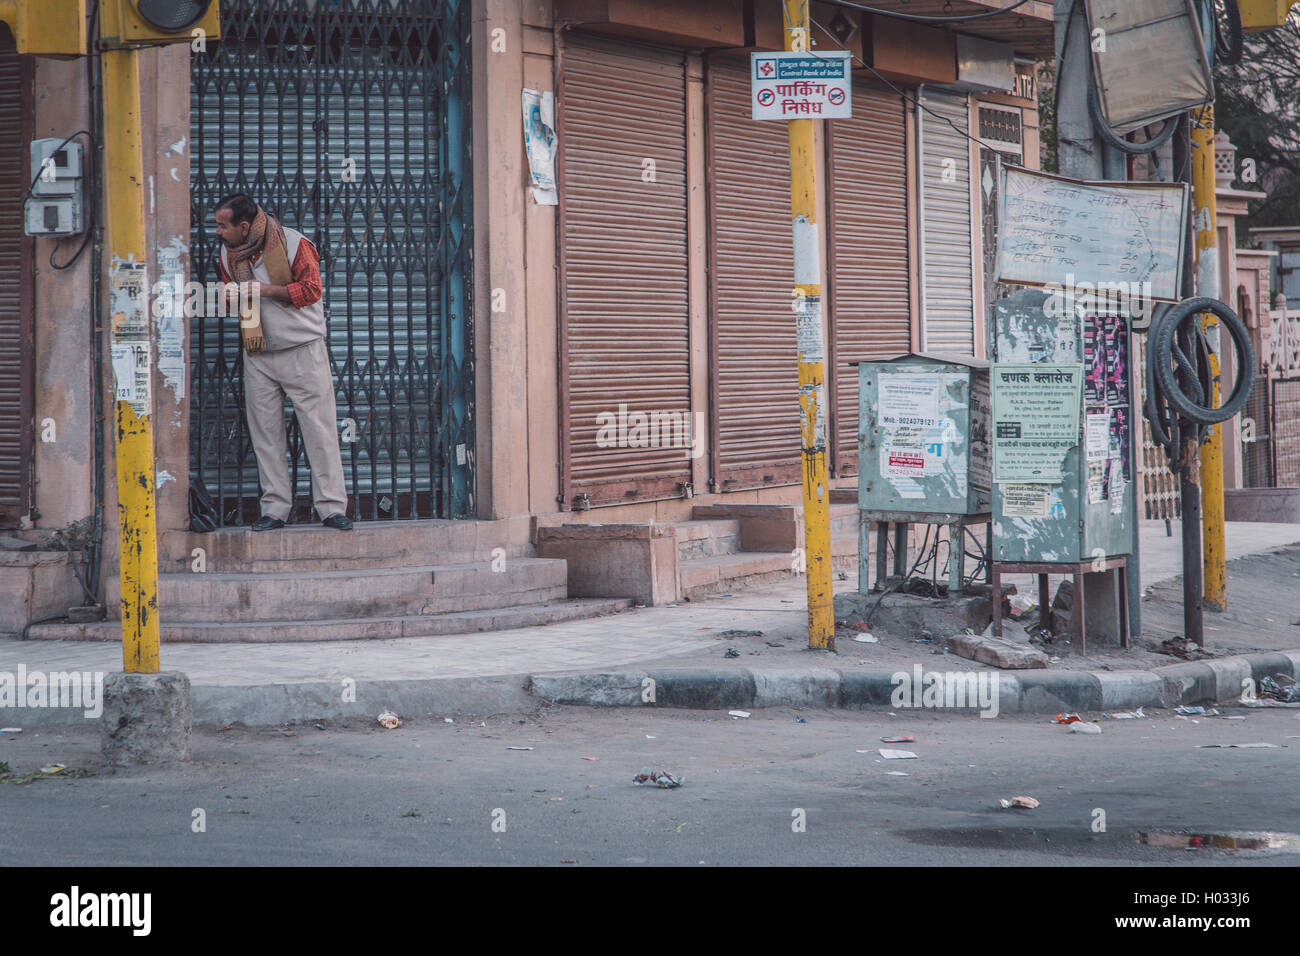 JODHPUR, INDIA - 12 FEBRUARY 2015: Man stands on doorway of building in empty street and looks around the corner. Post-processed Stock Photo